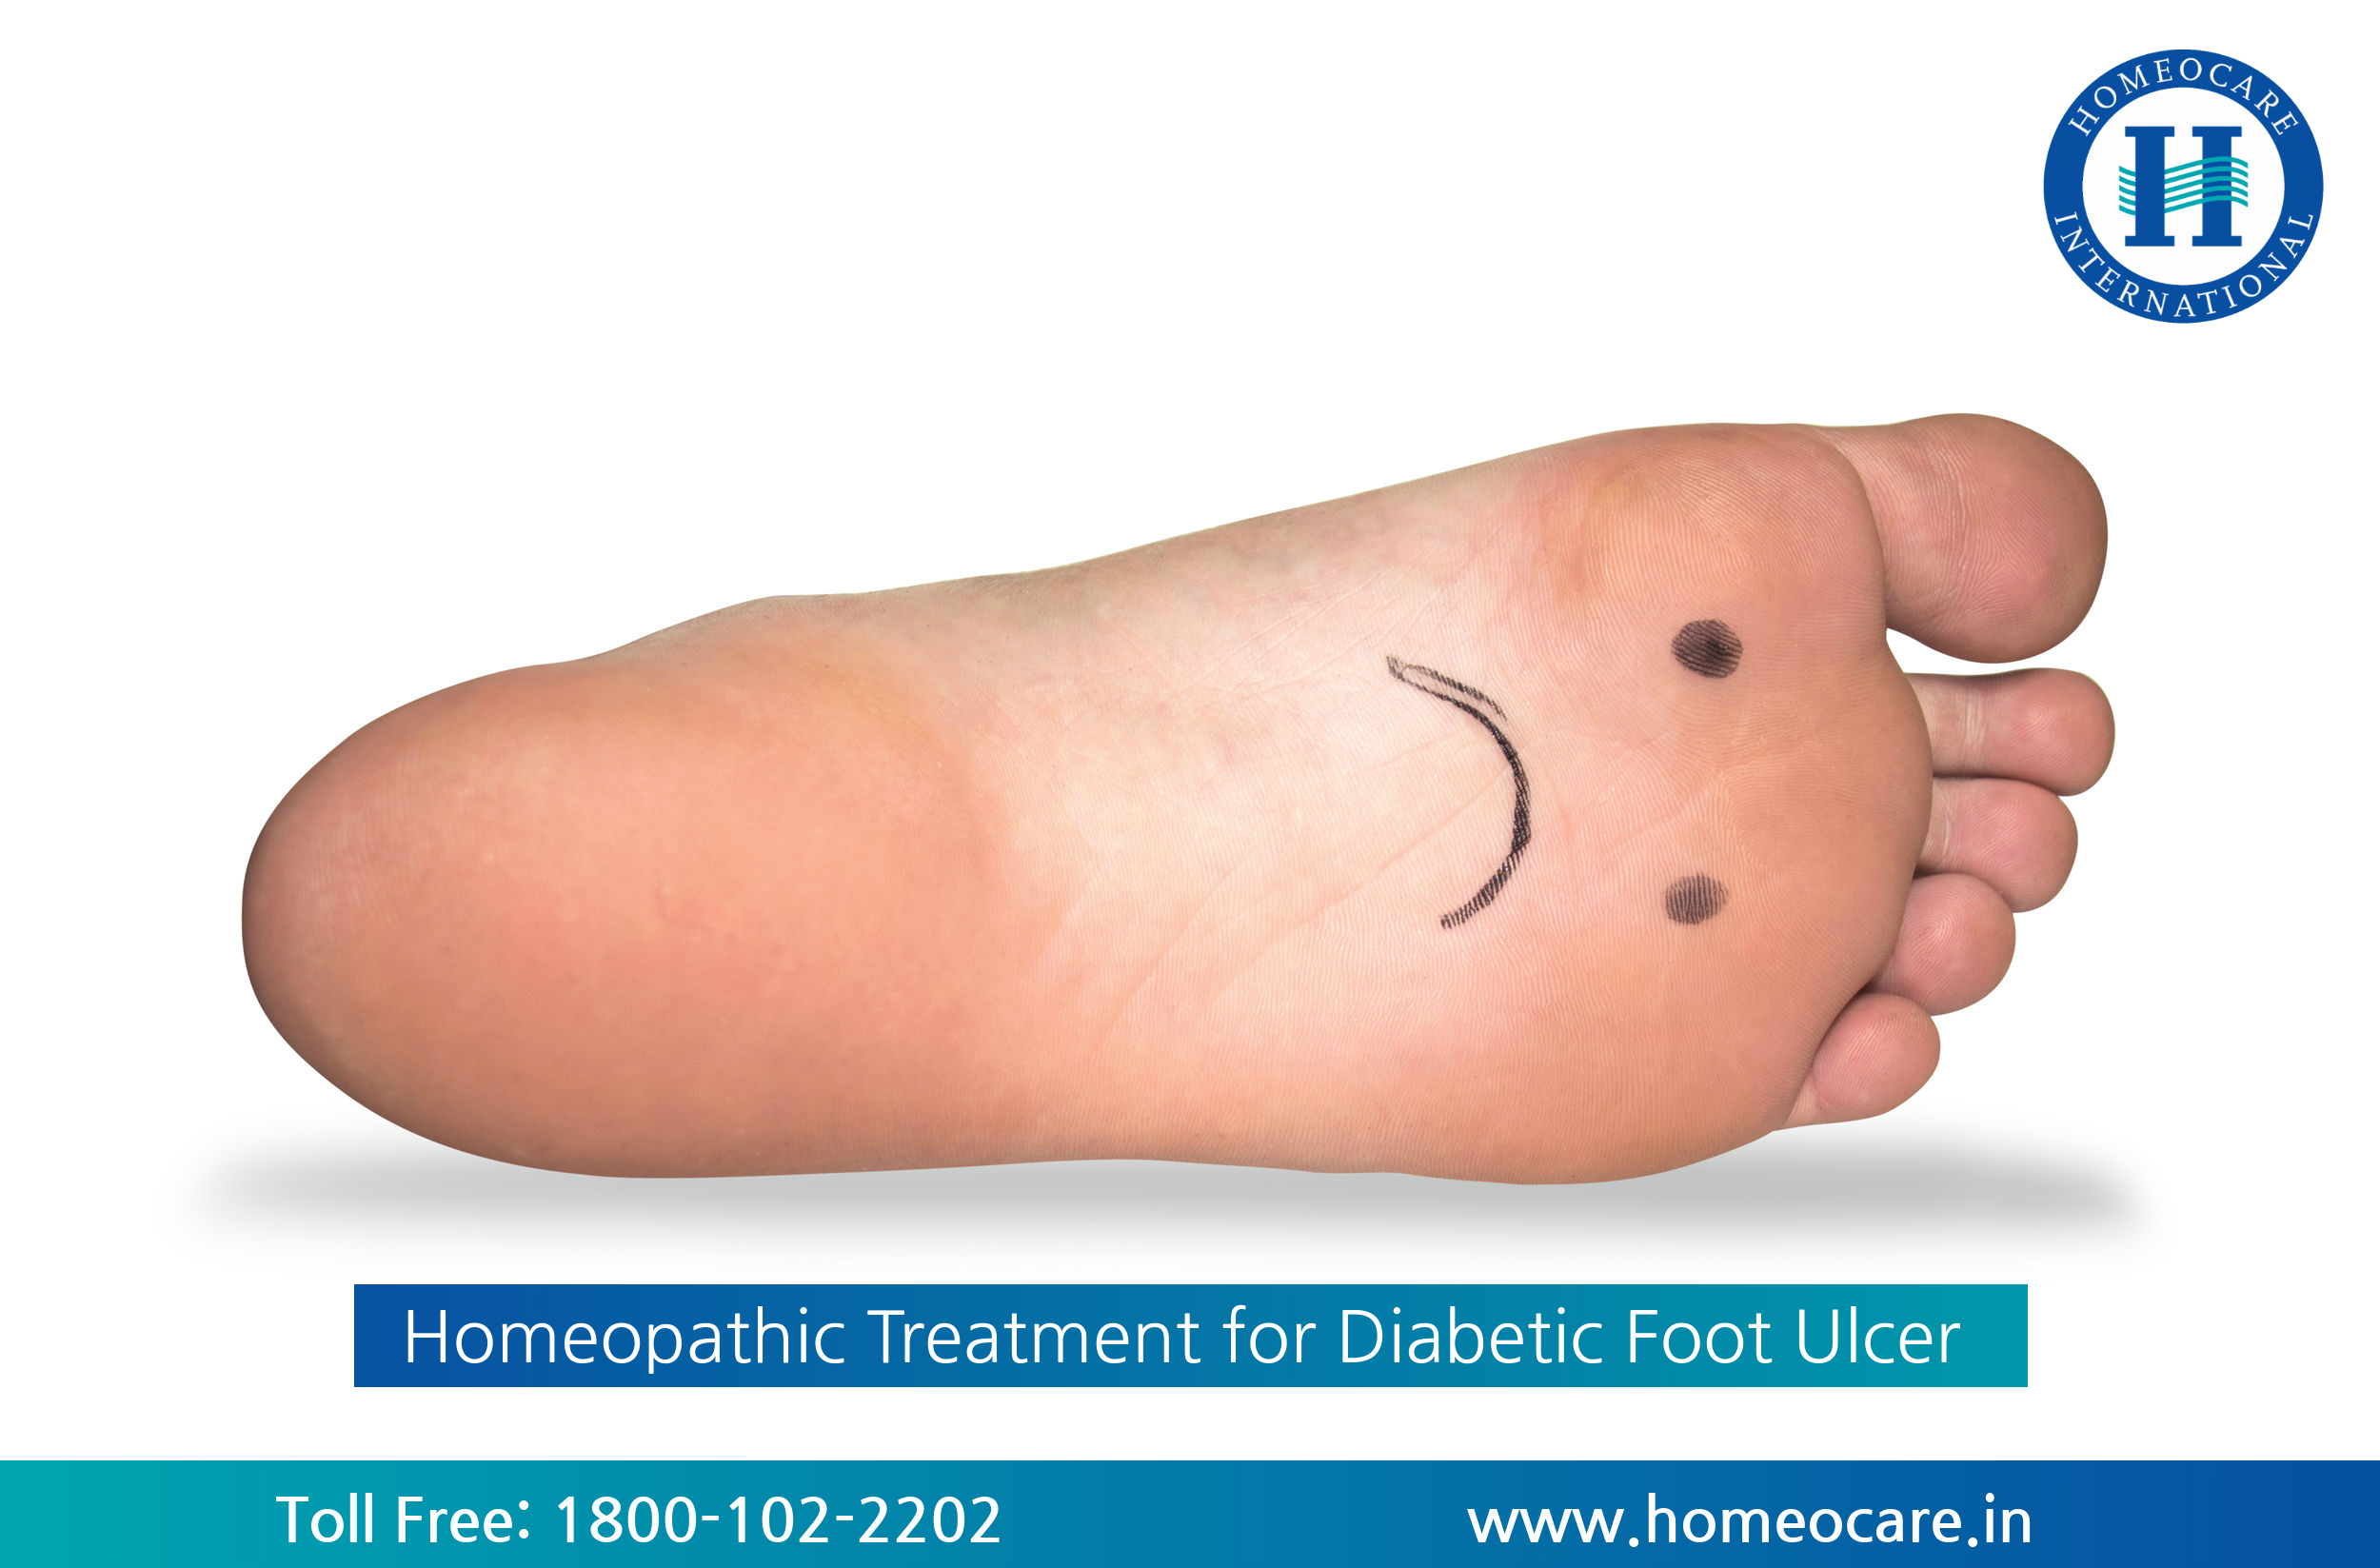 Homeopathy Treatment for Diabetic Foot Ulcer